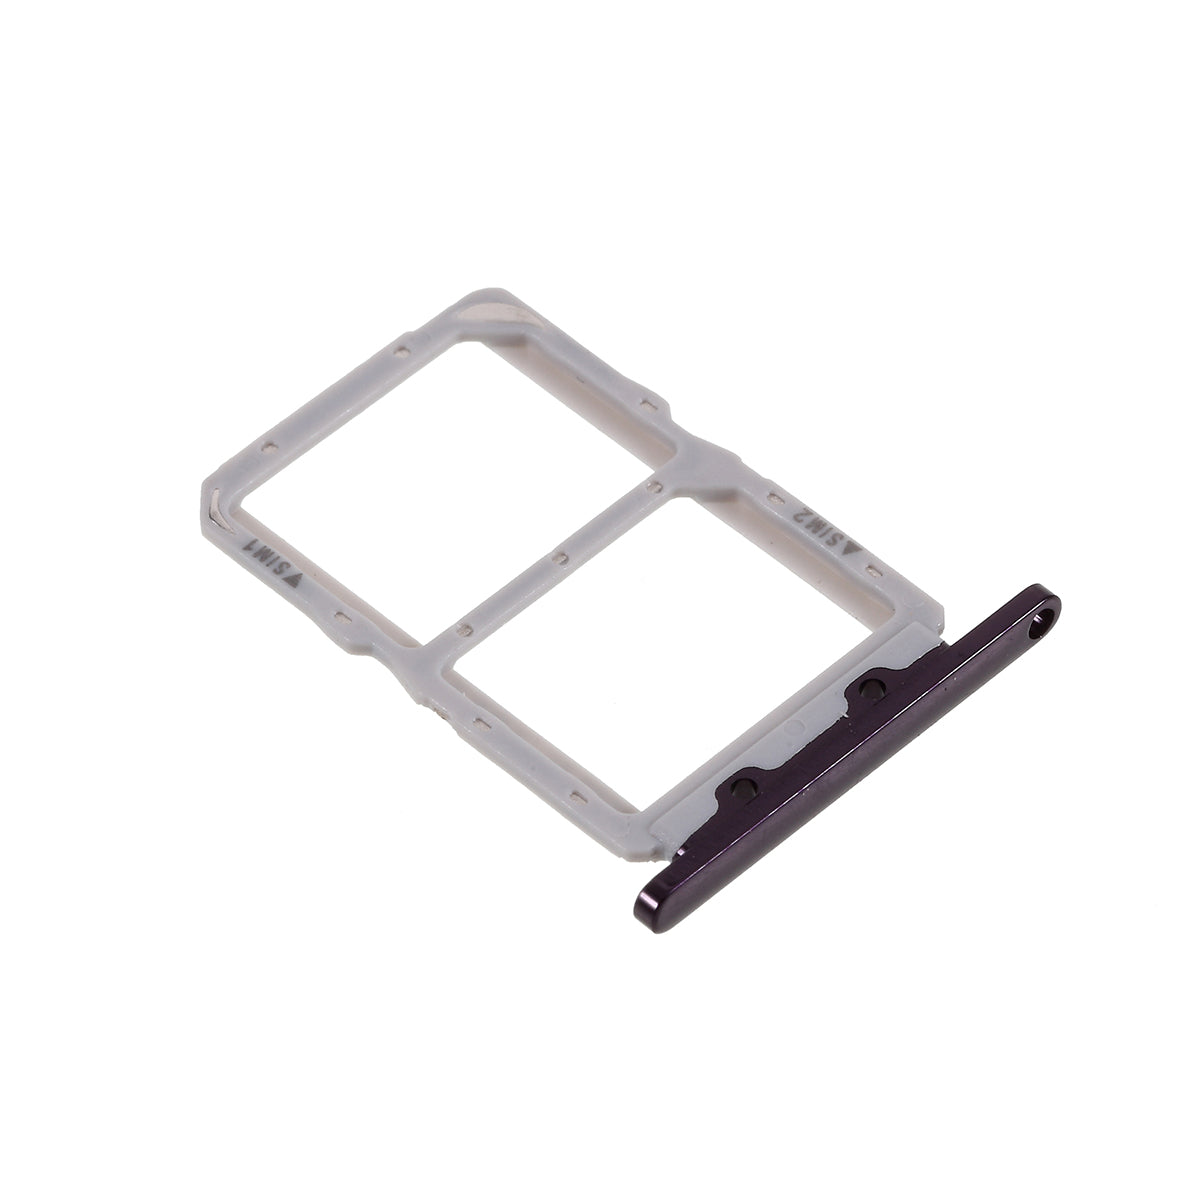 OEM SIM Card Tray Slot Holder Part for Huawei Honor 20 Pro - Coffee